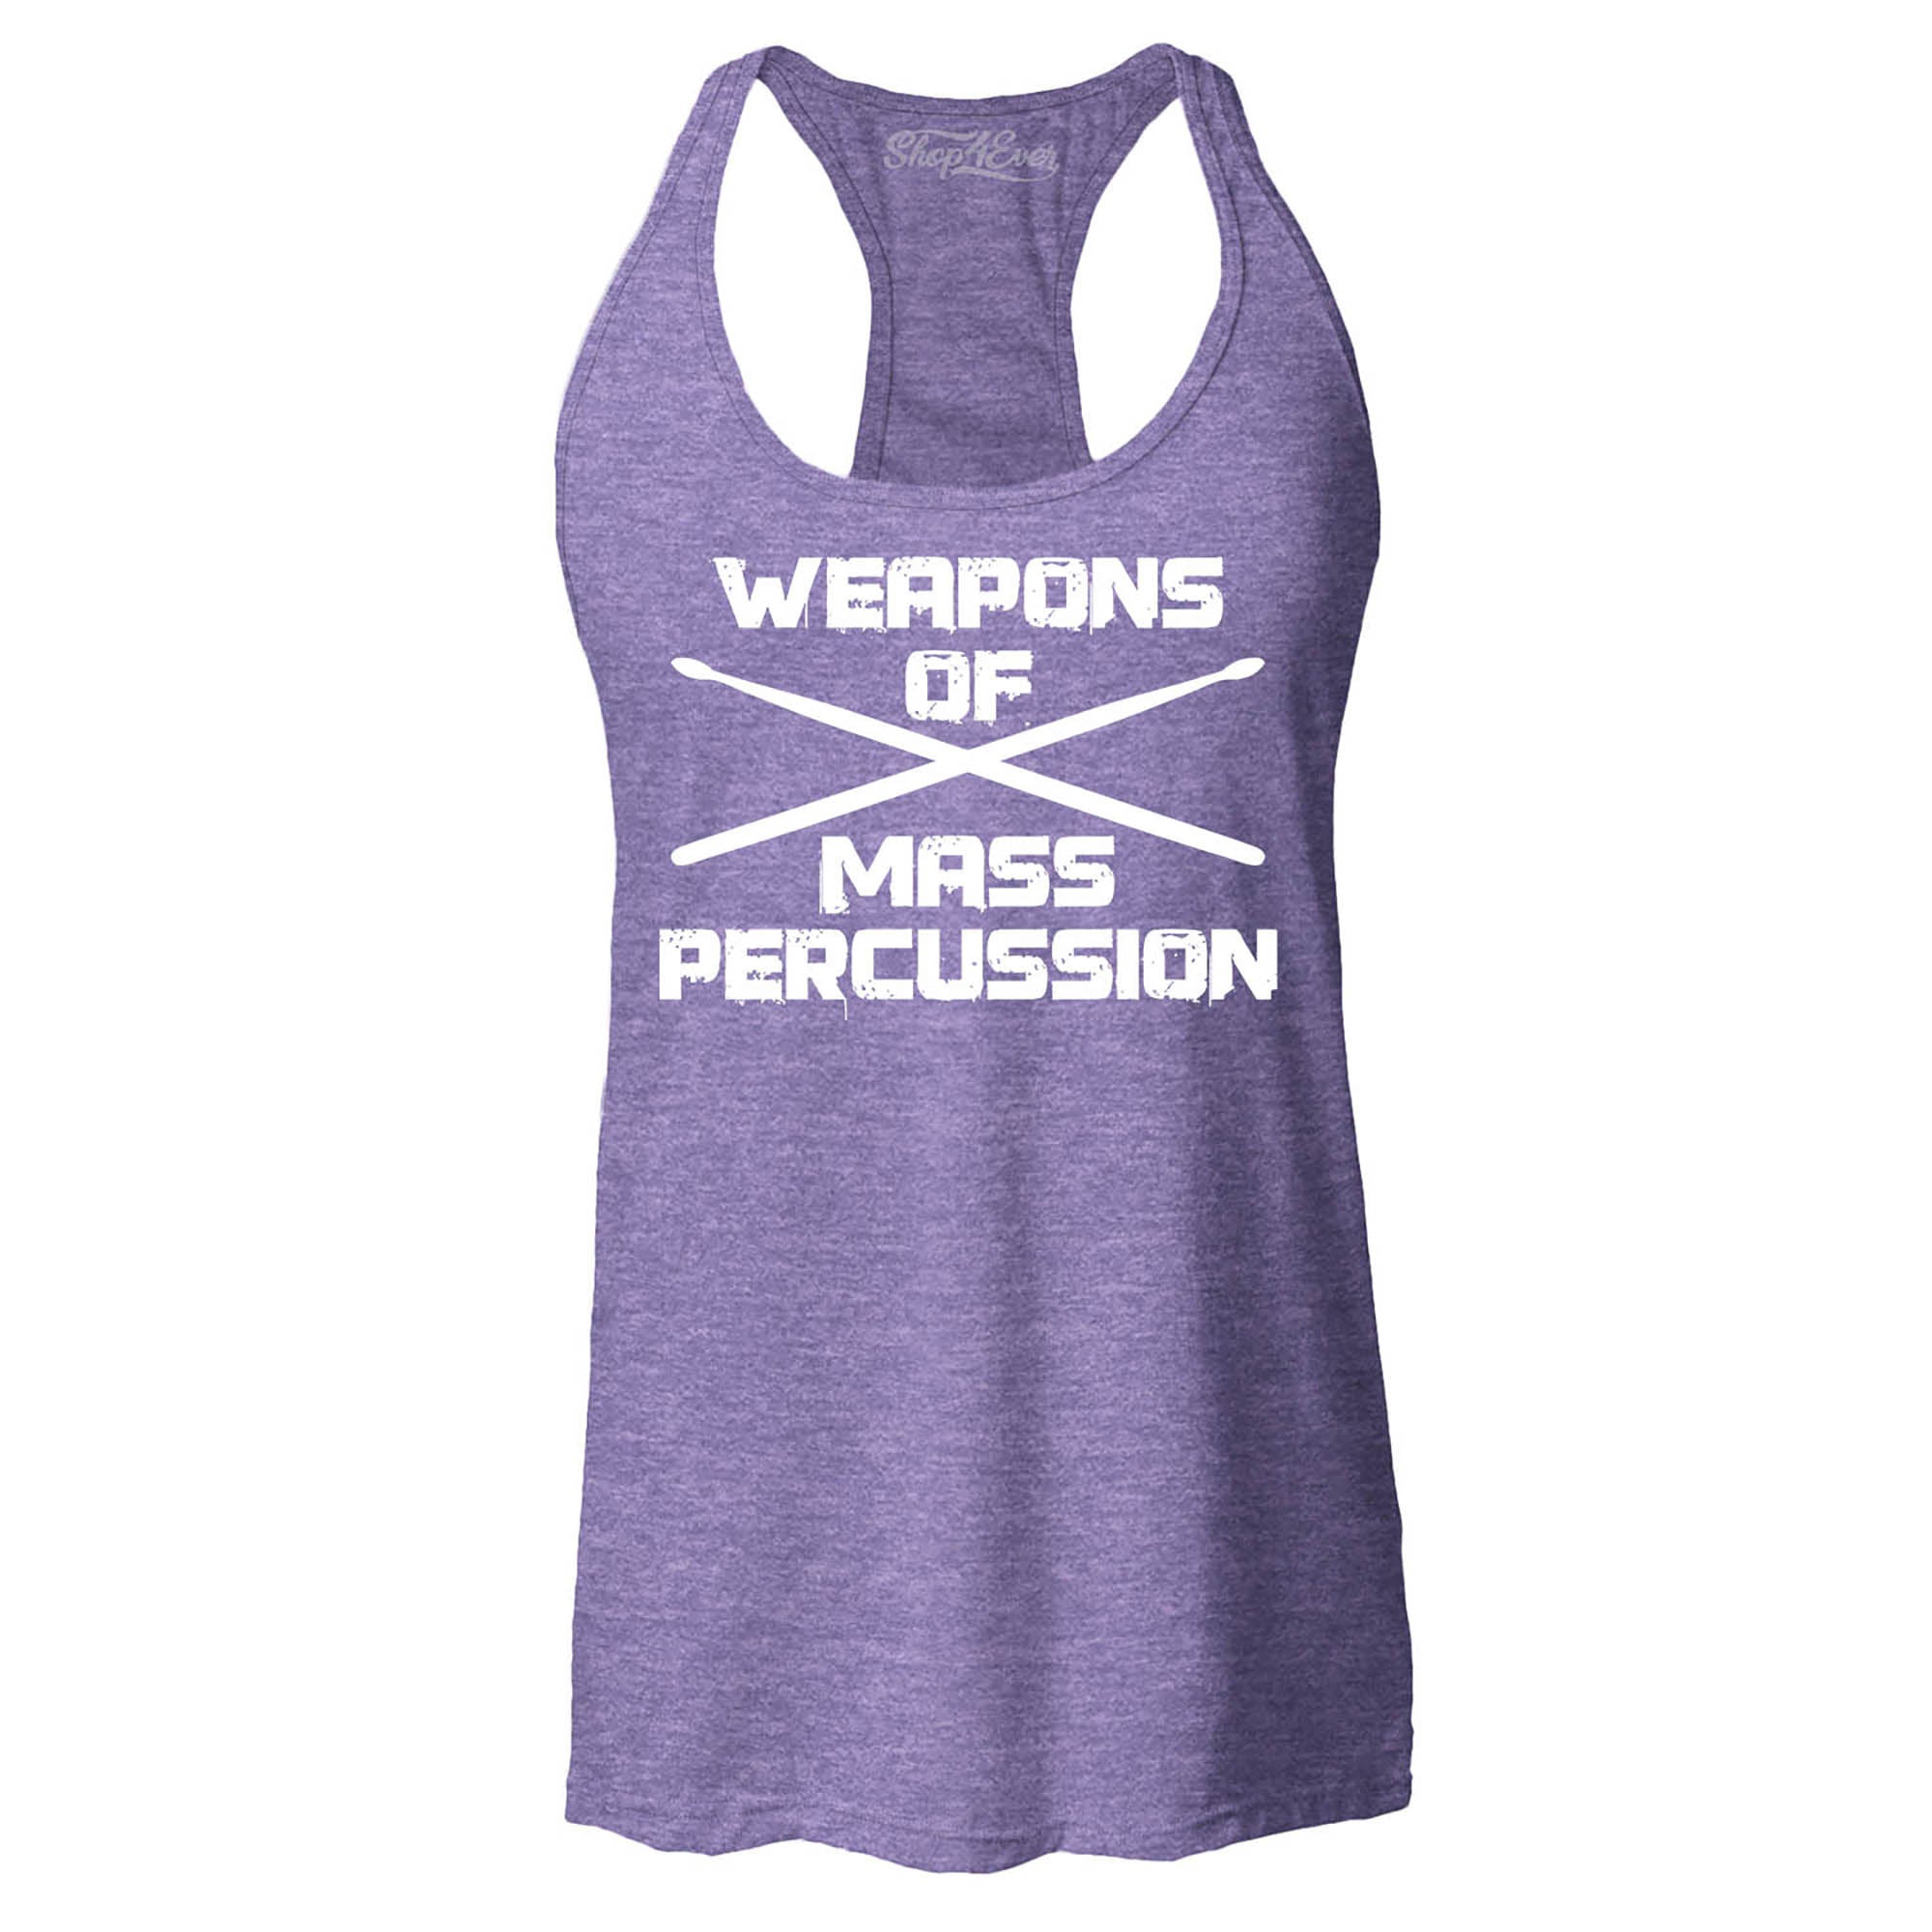 Weapons of Mass Percussion Drumsticks Drummer Women's Racerback Tank Top Slim Fit